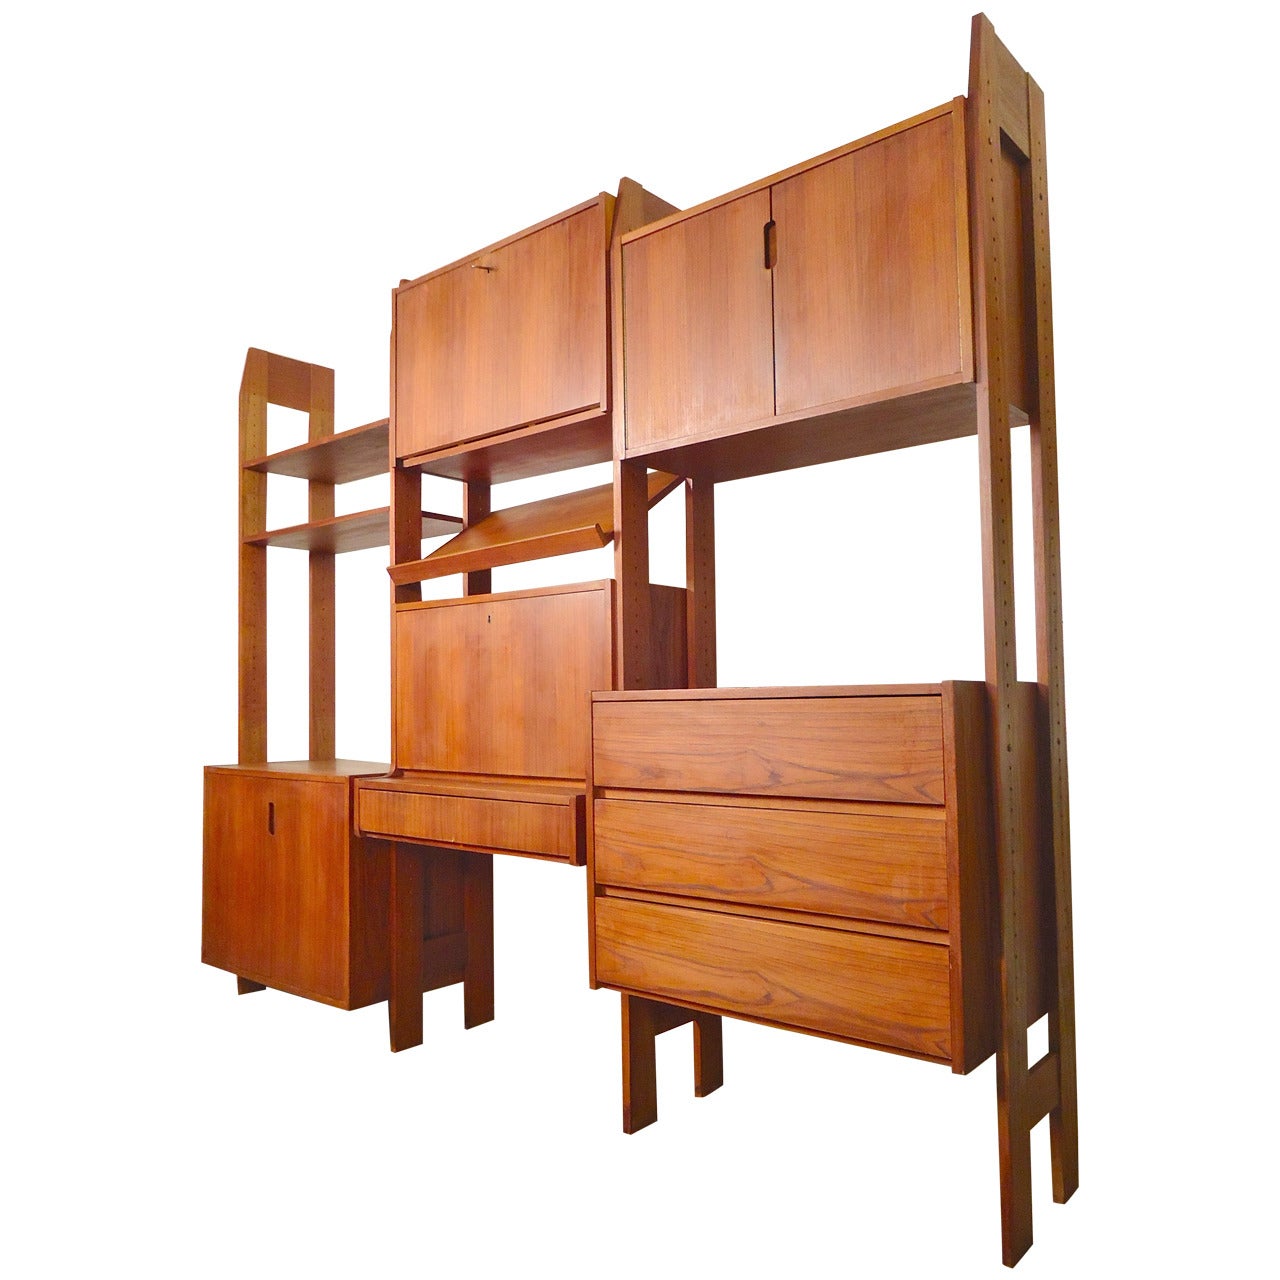 Terrific Mid-Century Standing Wall Unit and Room Divider